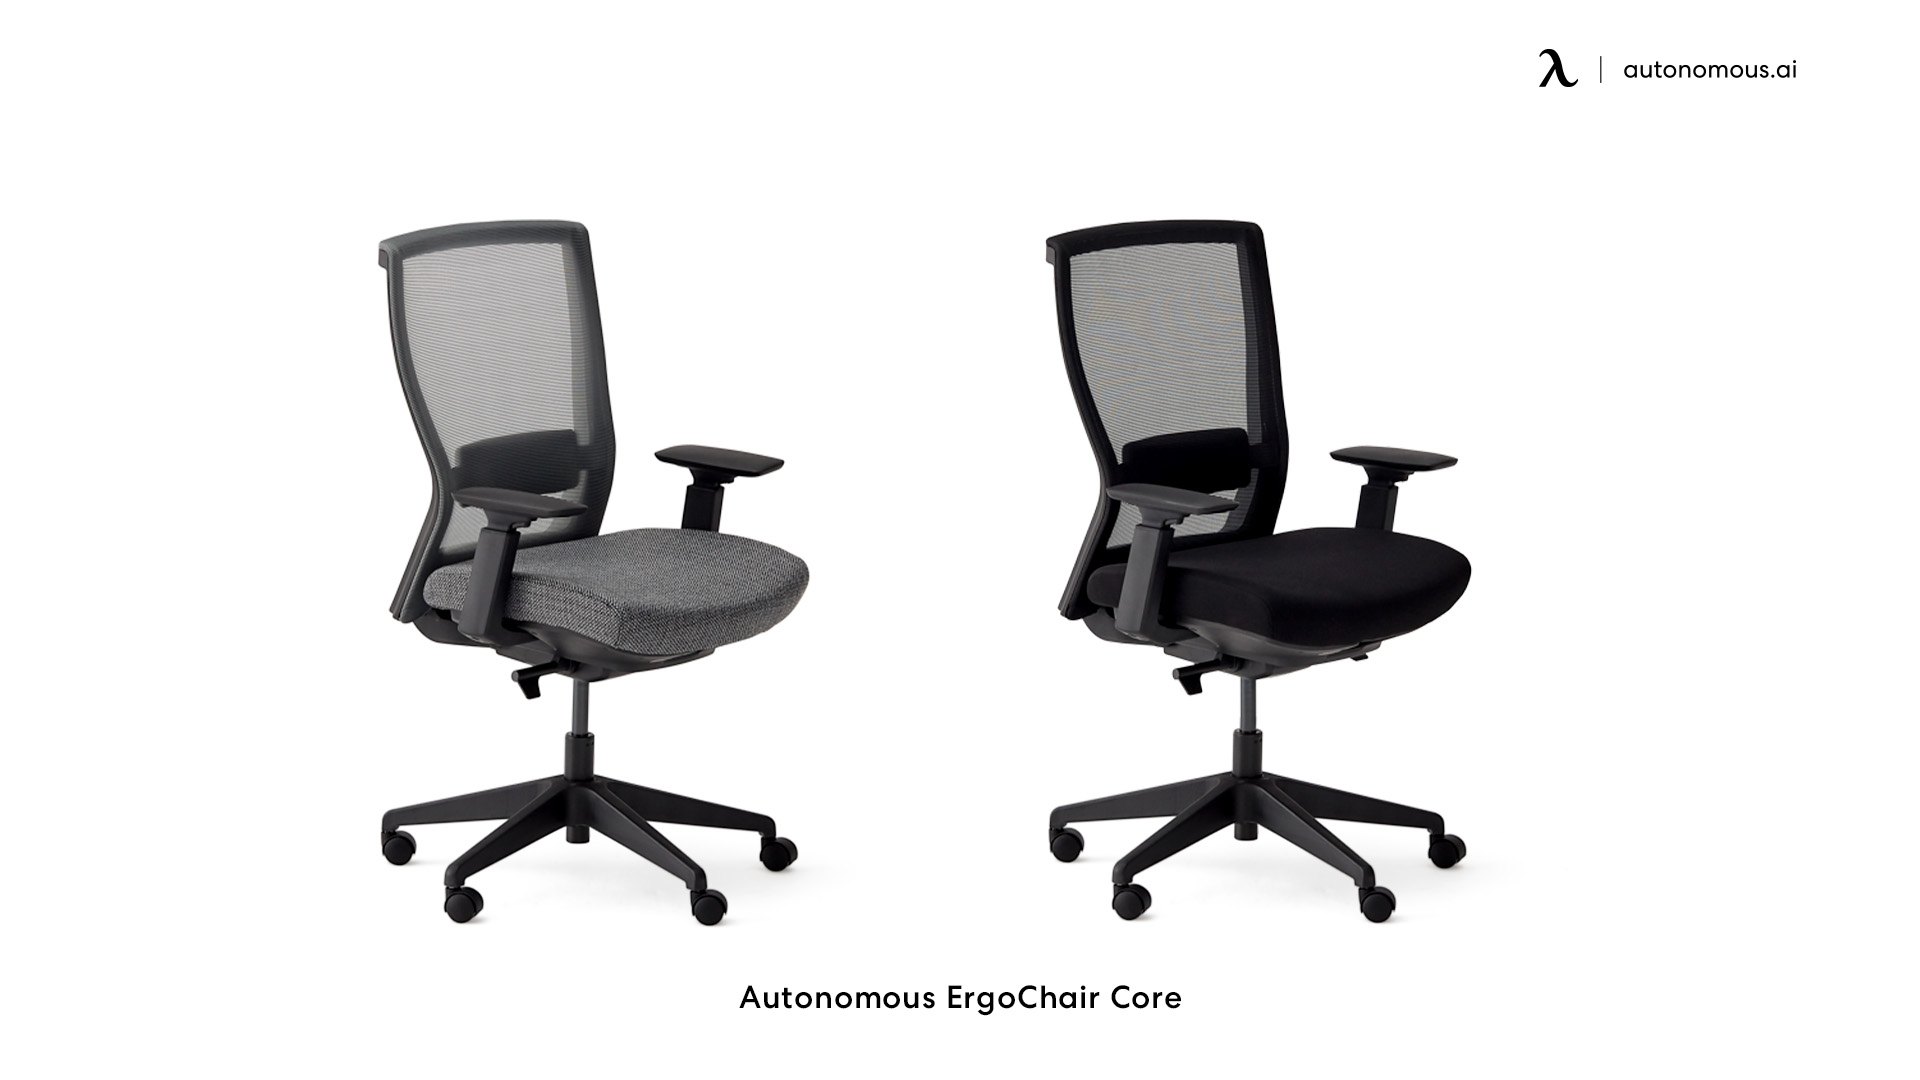 ErgoChair Core home office chair with back support